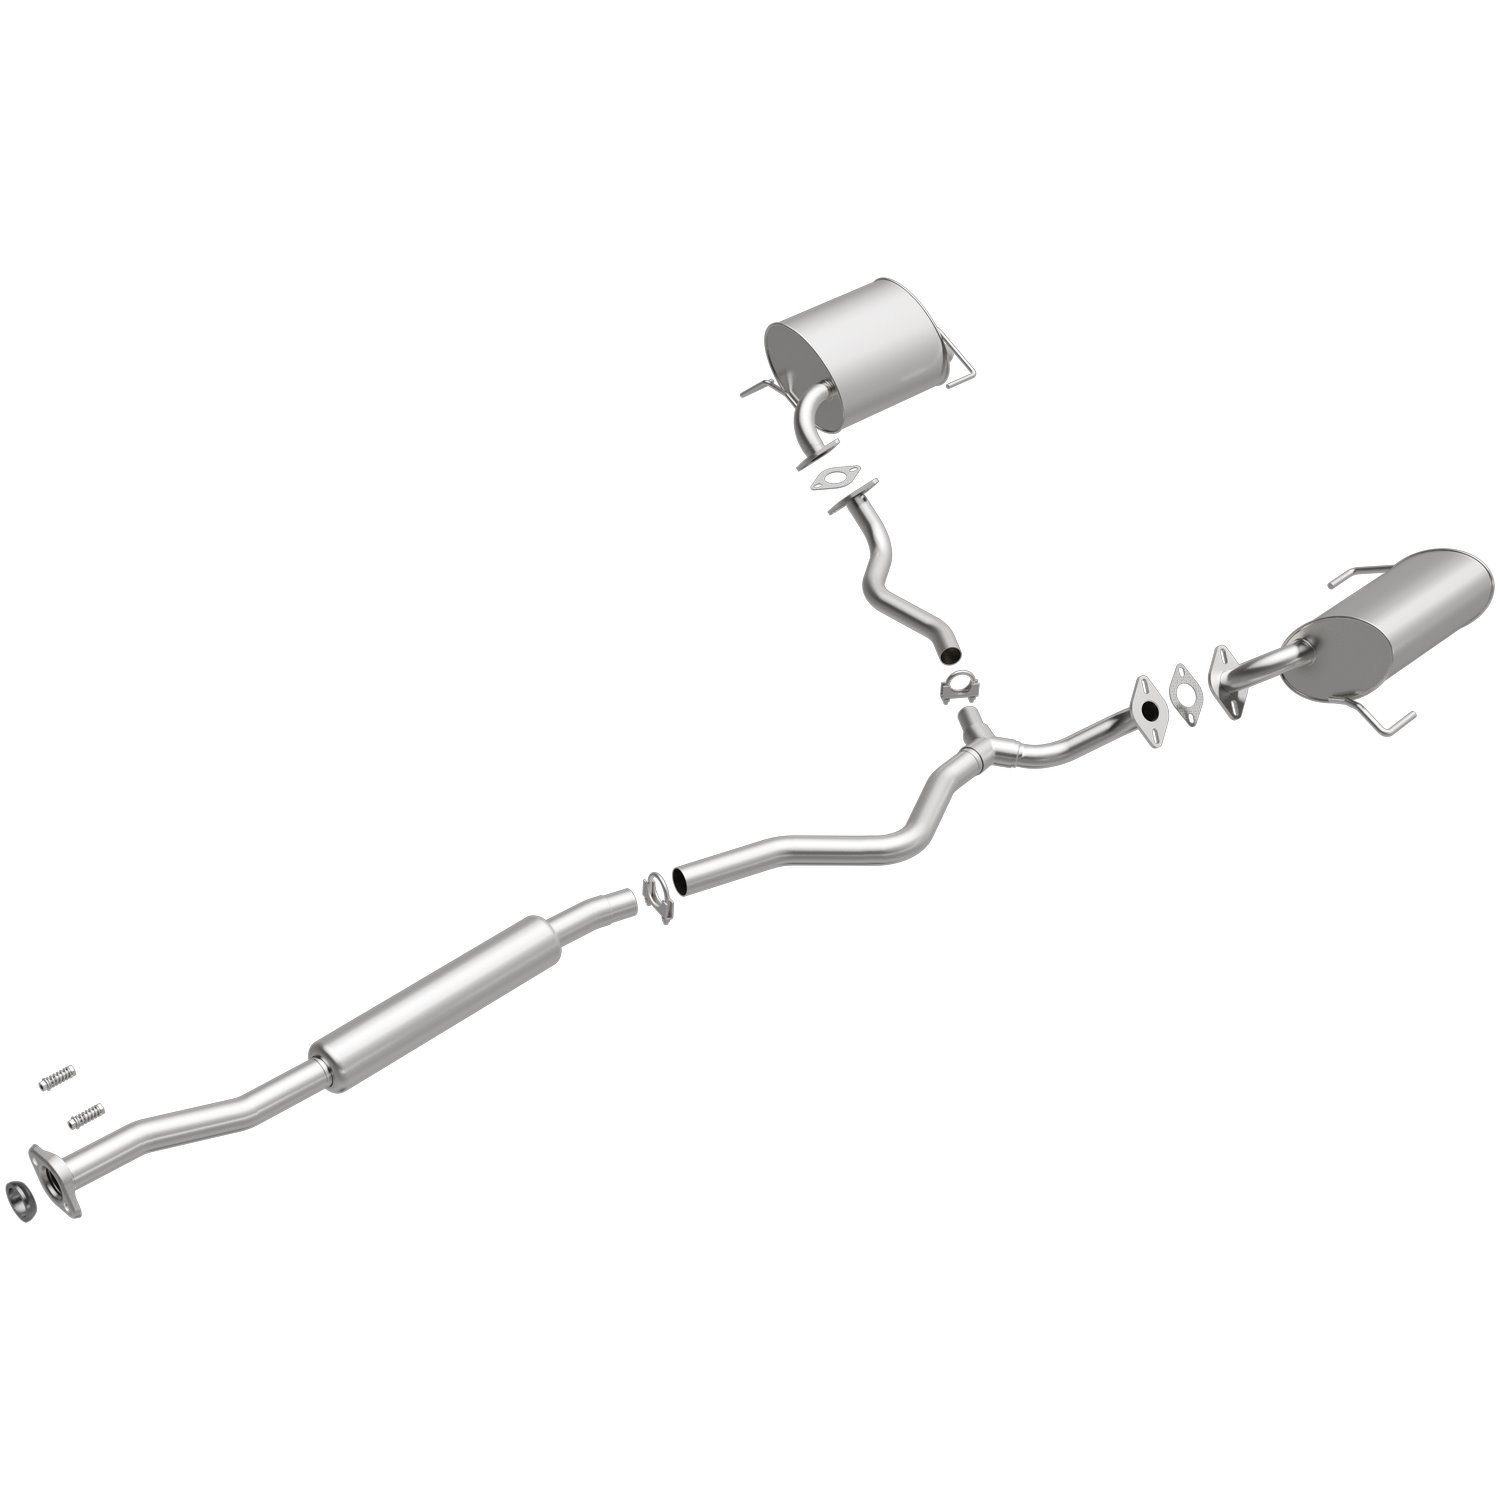 Direct-Fit Exhaust Kit, 2005 Subaru Outback 2.5L